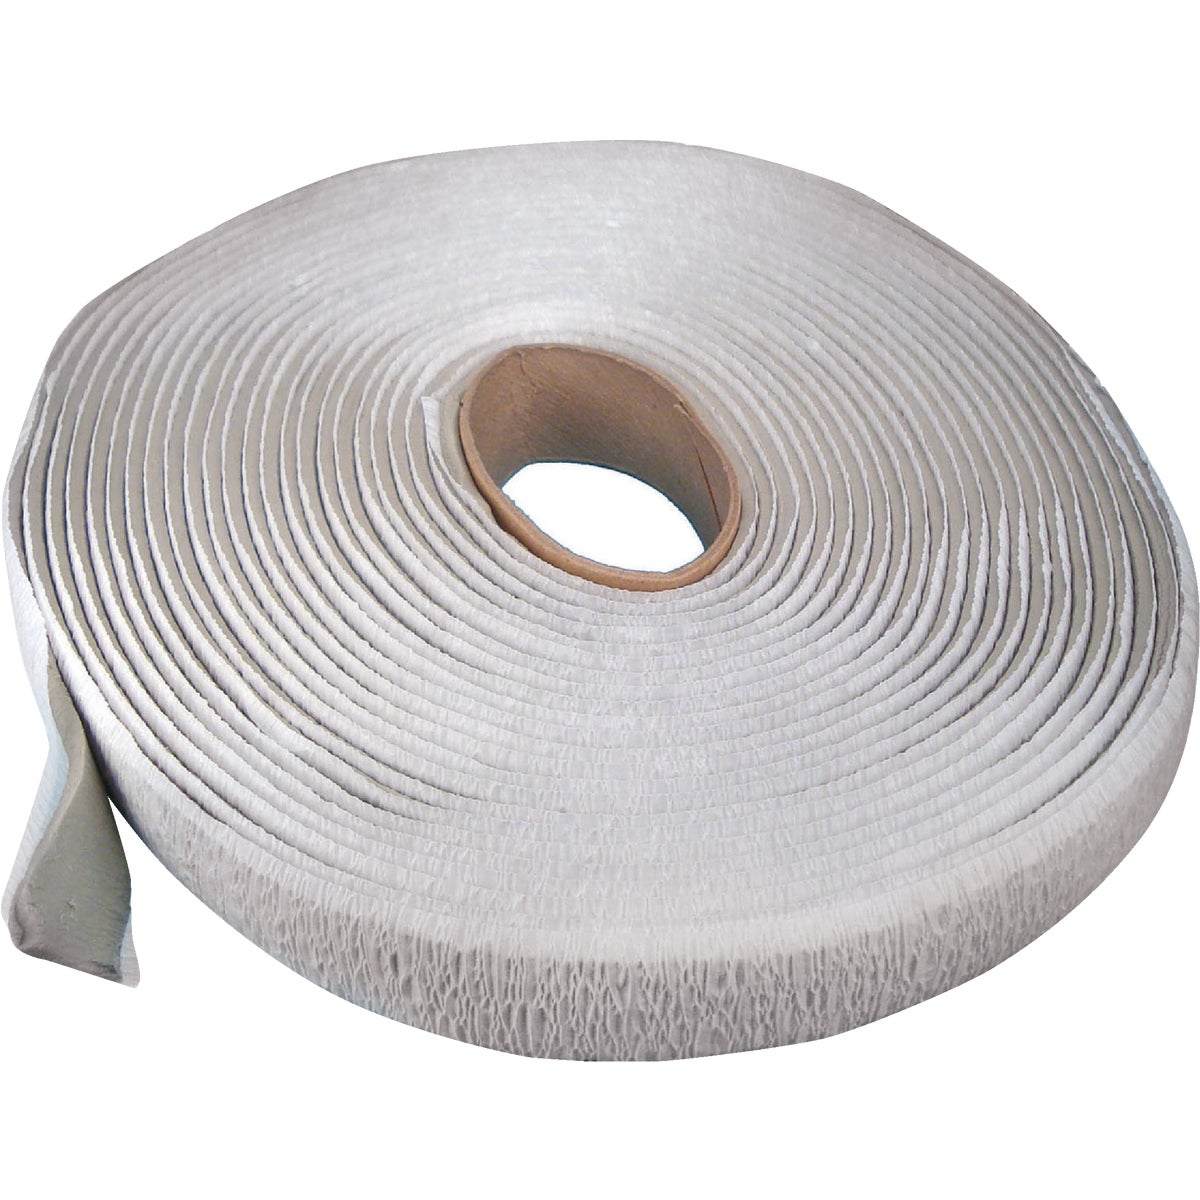 United States Hardware1/8 In. x 1 In. x 30 Ft. Putty Tape